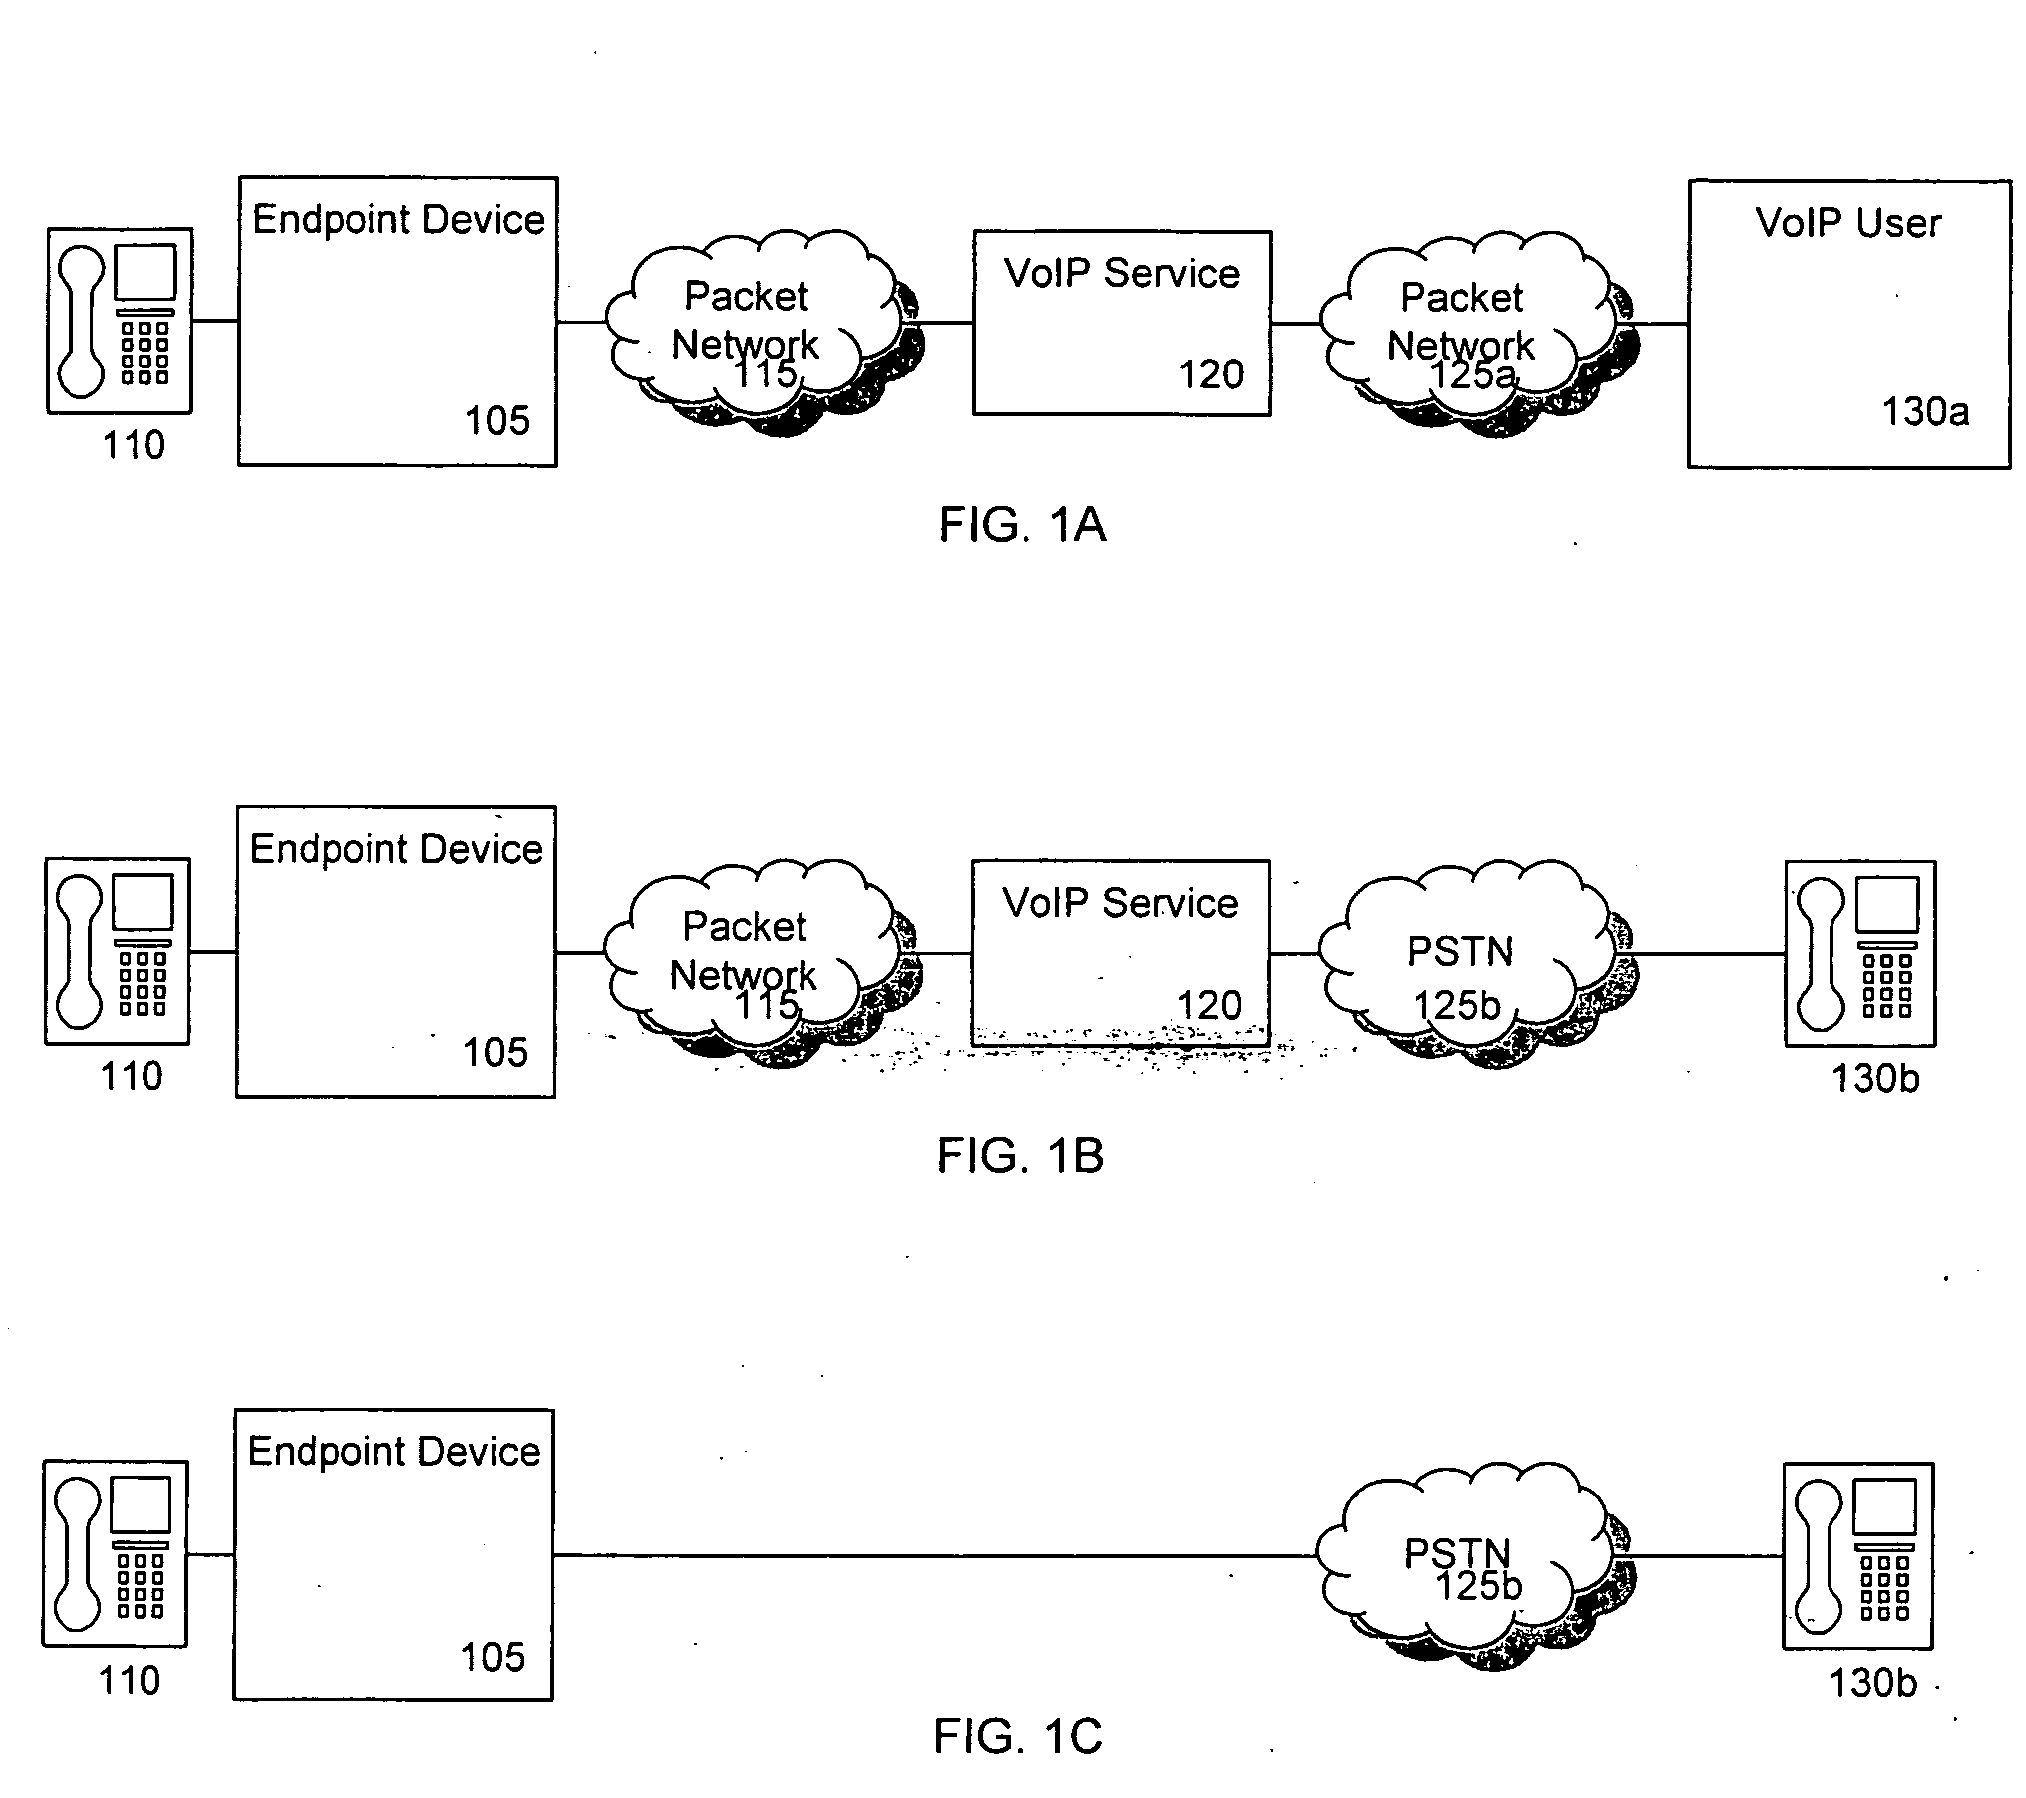 Method and apparatus for ensuring accessibility to emergency service via VoIP or via PSTN